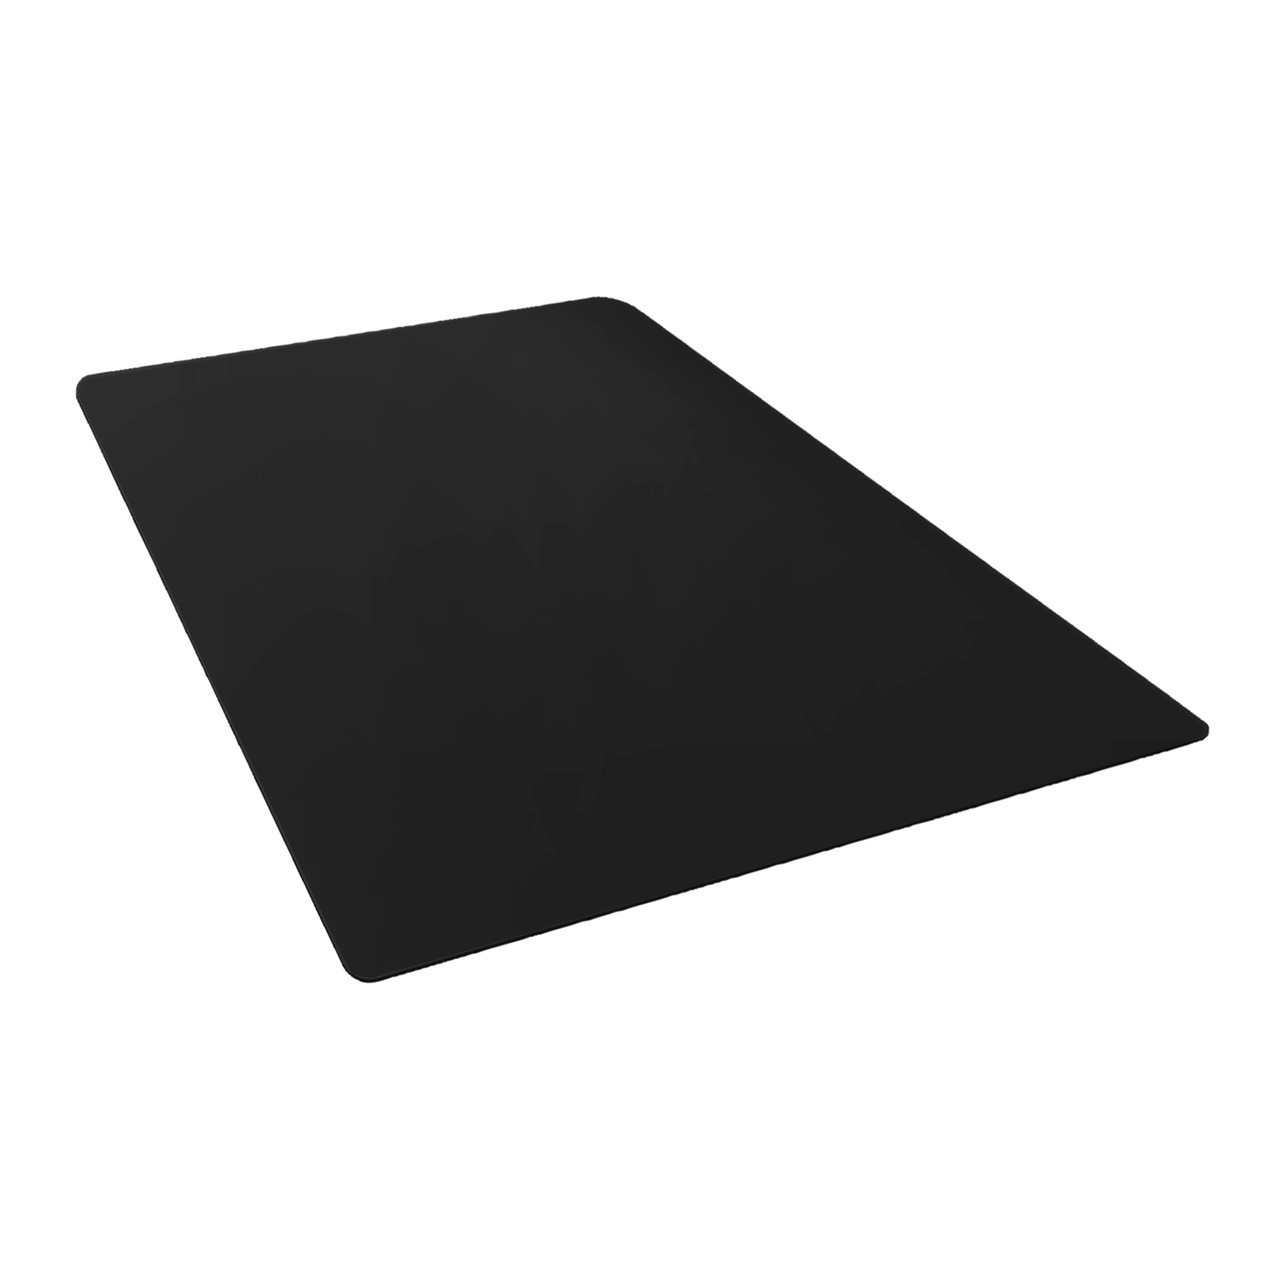 https://cdn11.bigcommerce.com/s-fjwps1jbkv/images/stencil/1280x1280/products/371/3085/p-tex-pet-crate-polypropylene-floor-protection-mat-for-use-on-hard-floors-and-carpets-or-rectangular-dog-crate-mat-or-black-or-3-sizes-available__03445.1688988405.jpg?c=2?imbypass=on